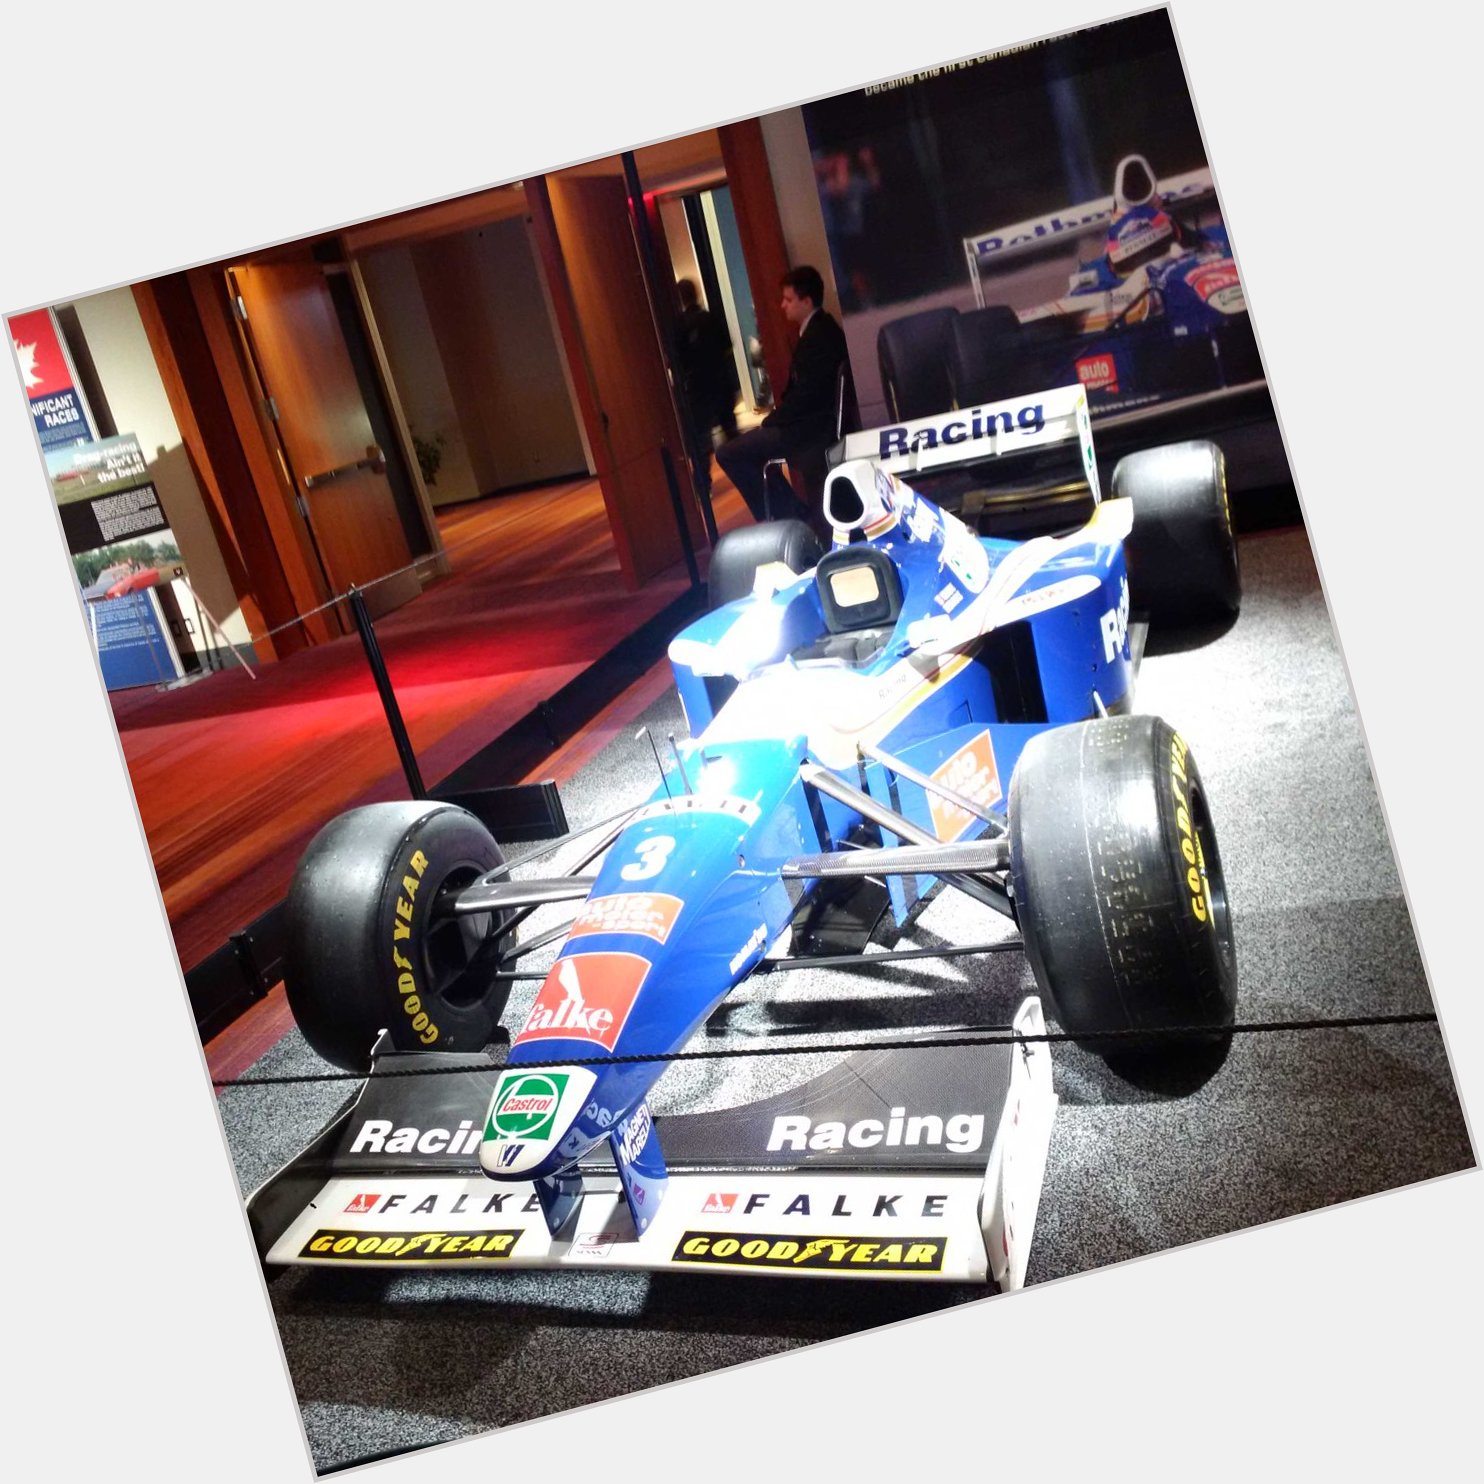 Happy Birthday to Canadian racing legend Jacques Villeneuve. His 1997 F1 World Championship car was at the Auto Show 